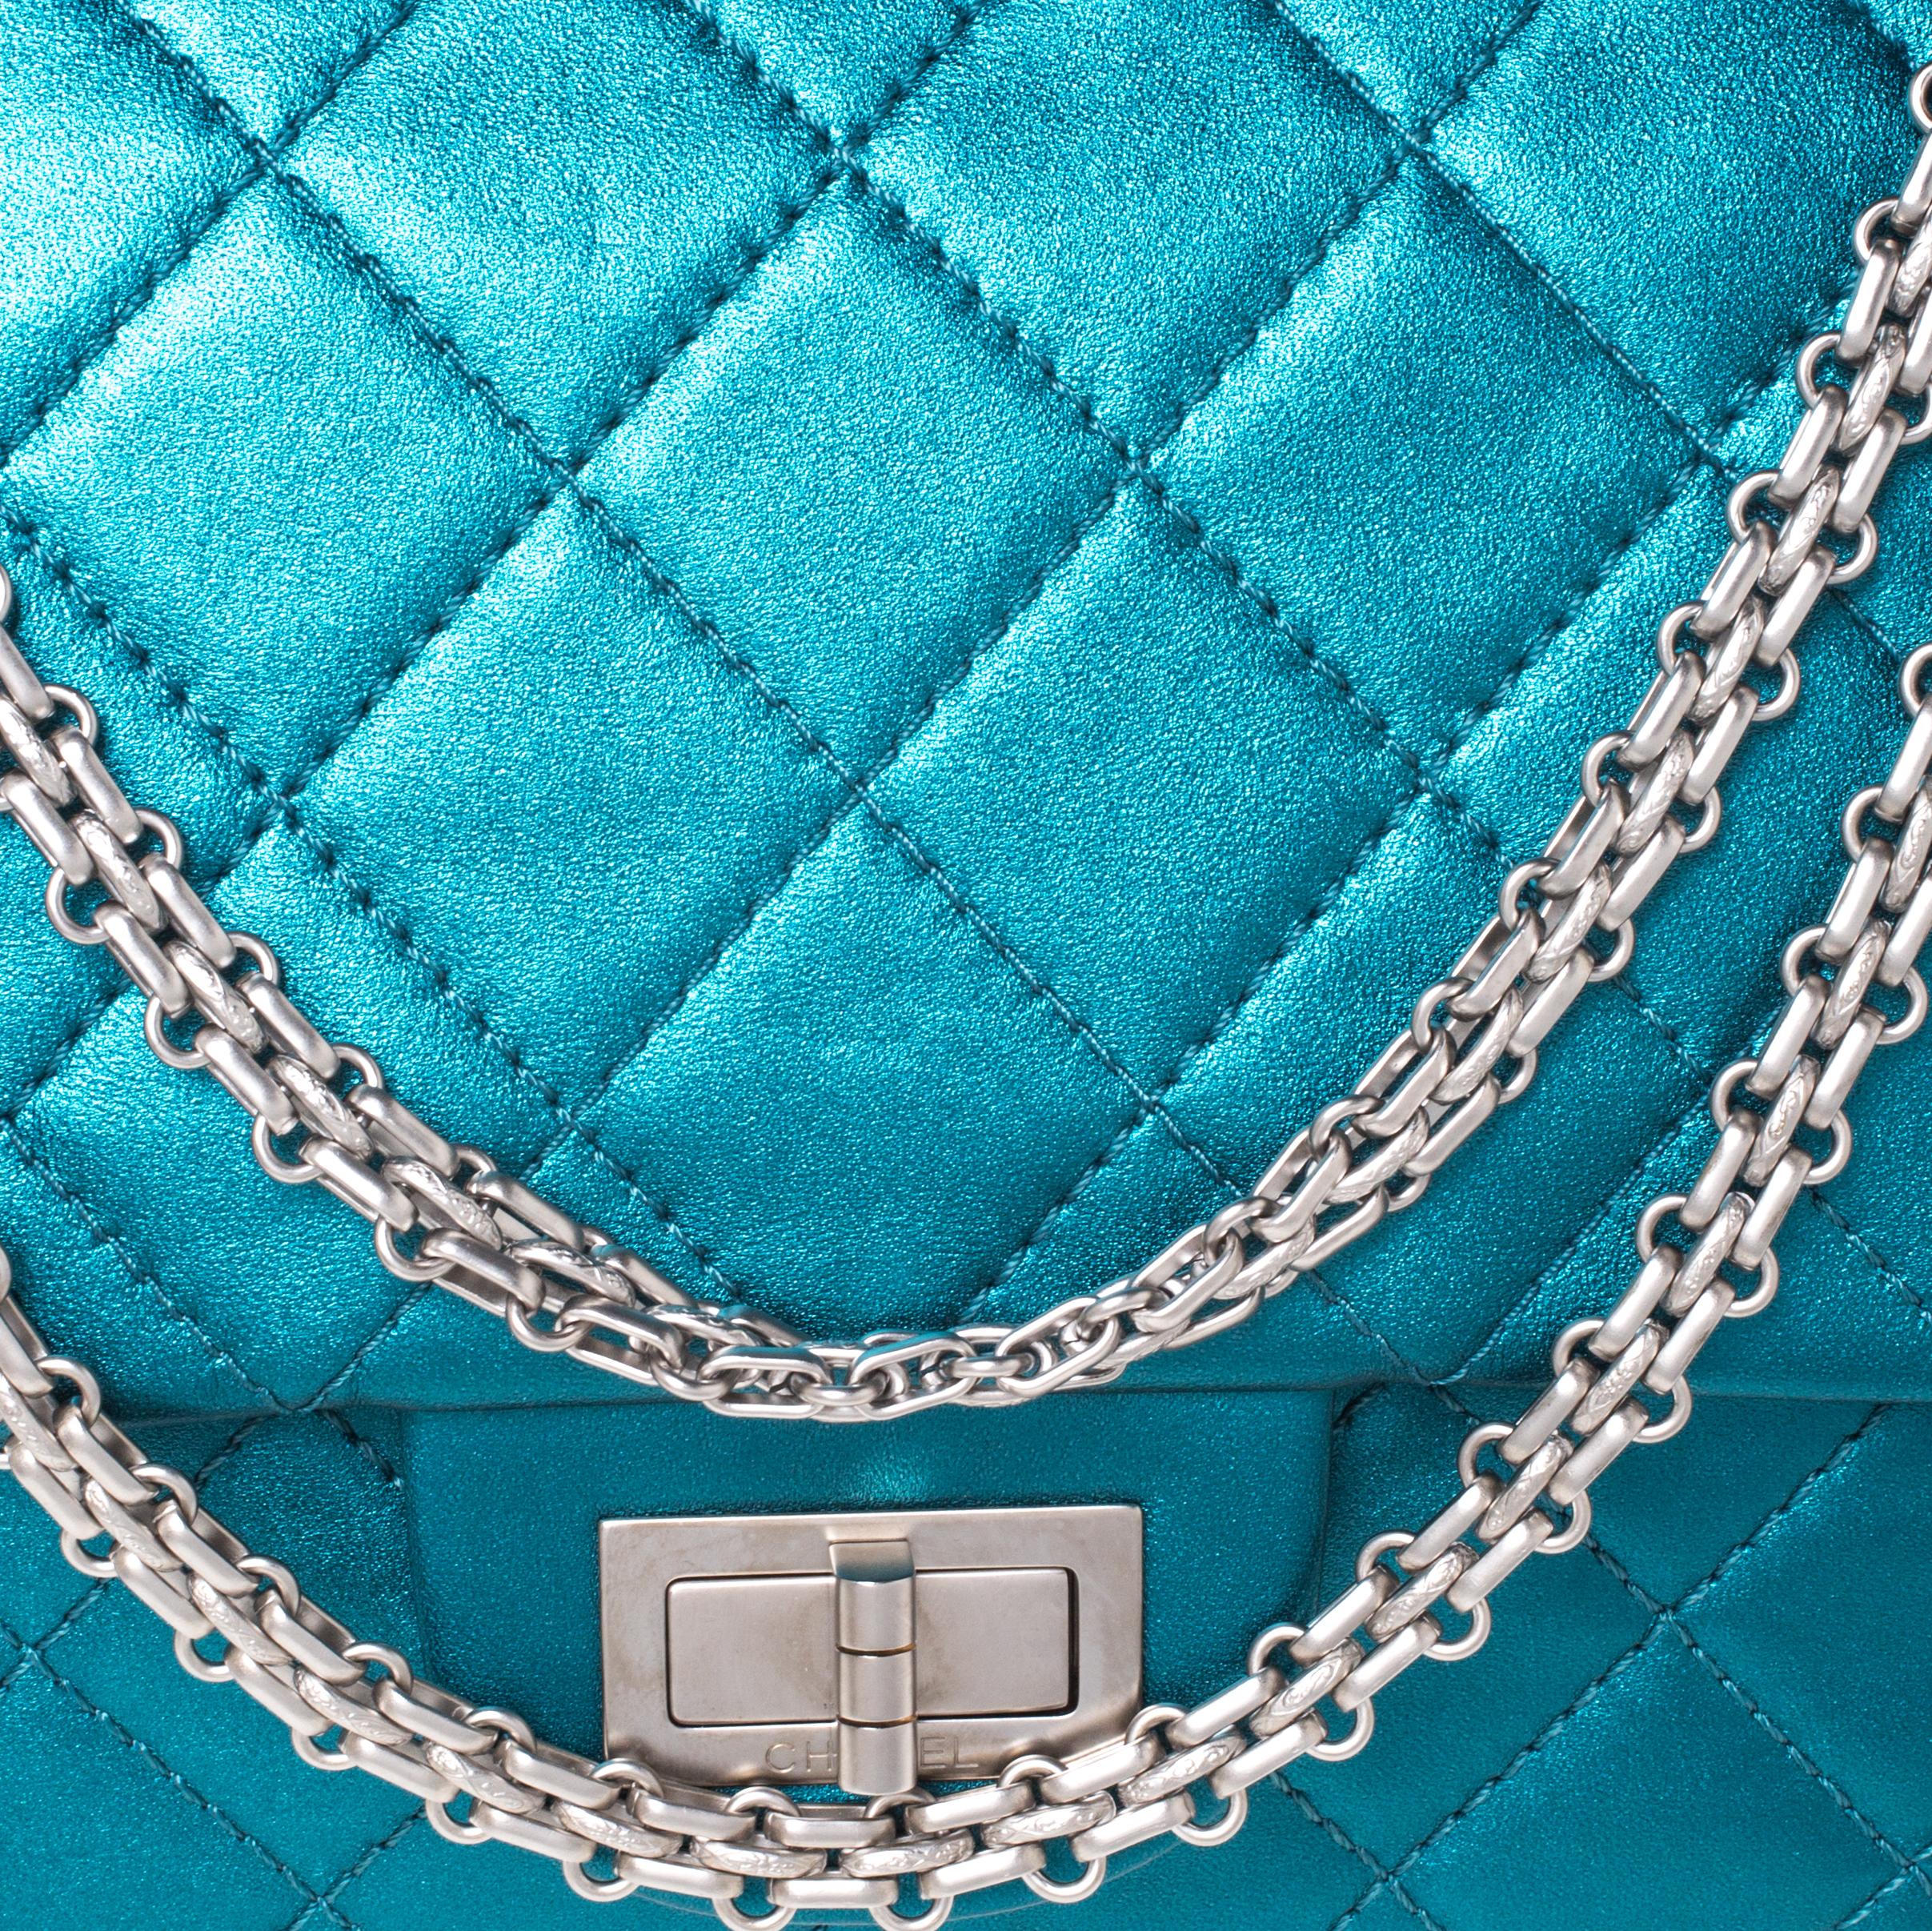 Women's Chanel Metallic Teal Quilted Leather Jumbo Reissue 2.55 Classic 227 Flap Bag